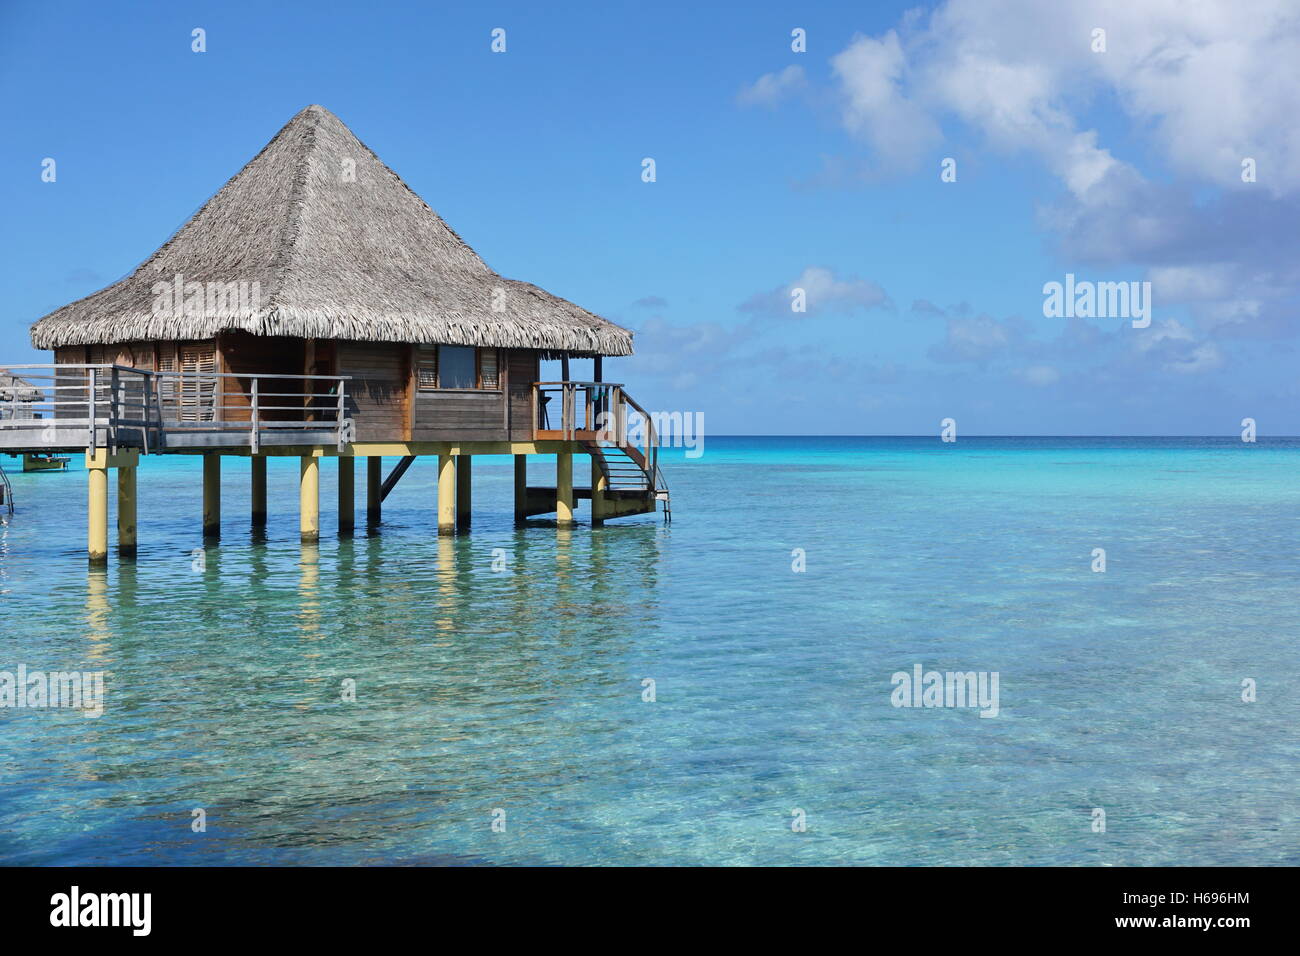 Overwater bungalow with thatched roof in the lagoon of Rangiroa, south Pacific ocean, Tuamotu, French Polynesia Stock Photo